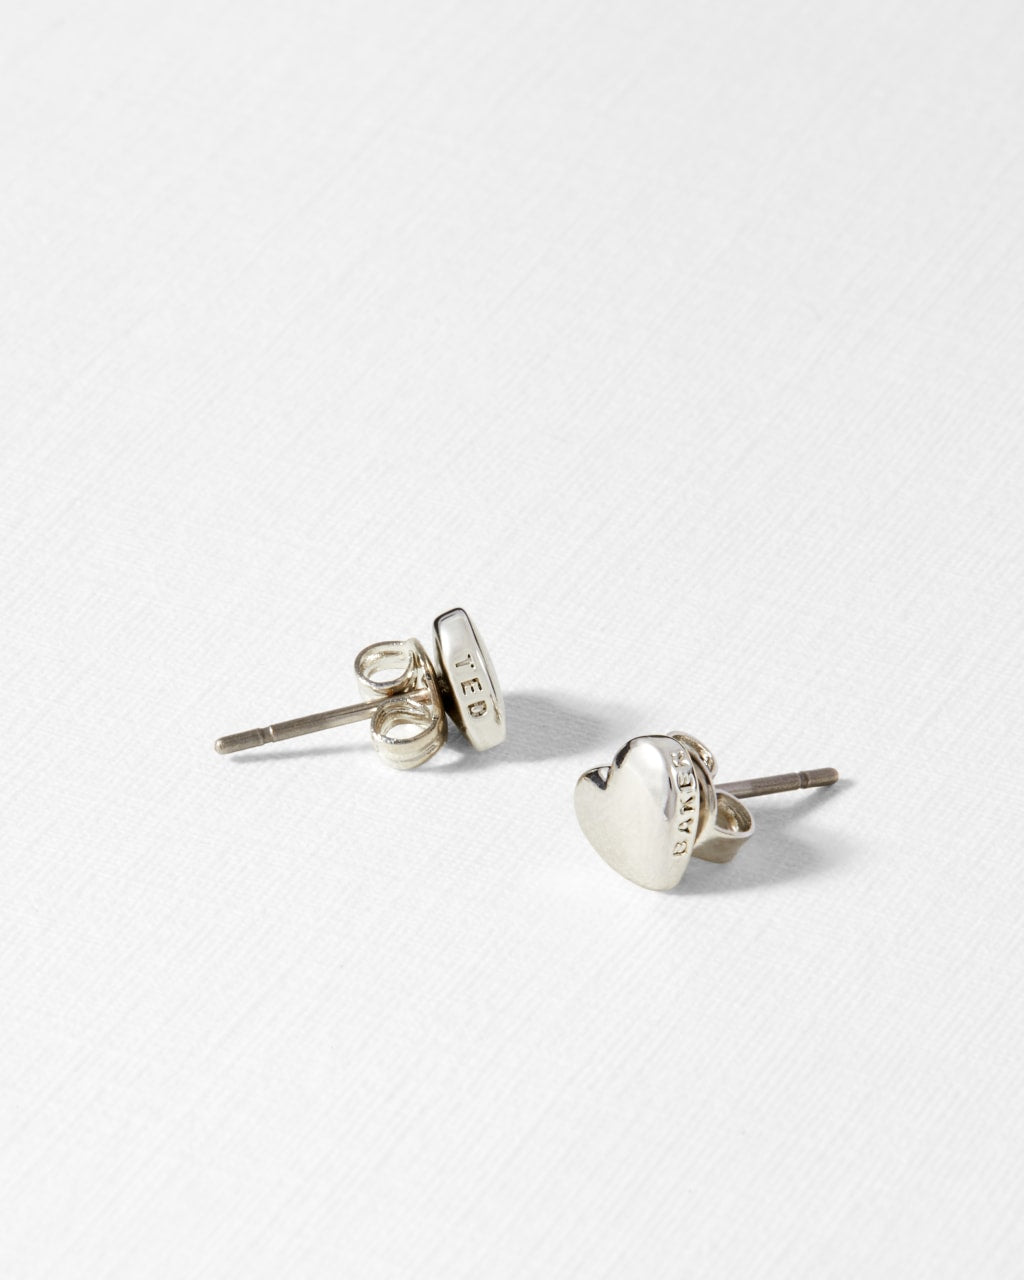 Harly Tiny Heart Stud Earring in Silver | eightywingold - official partner of Ted Baker